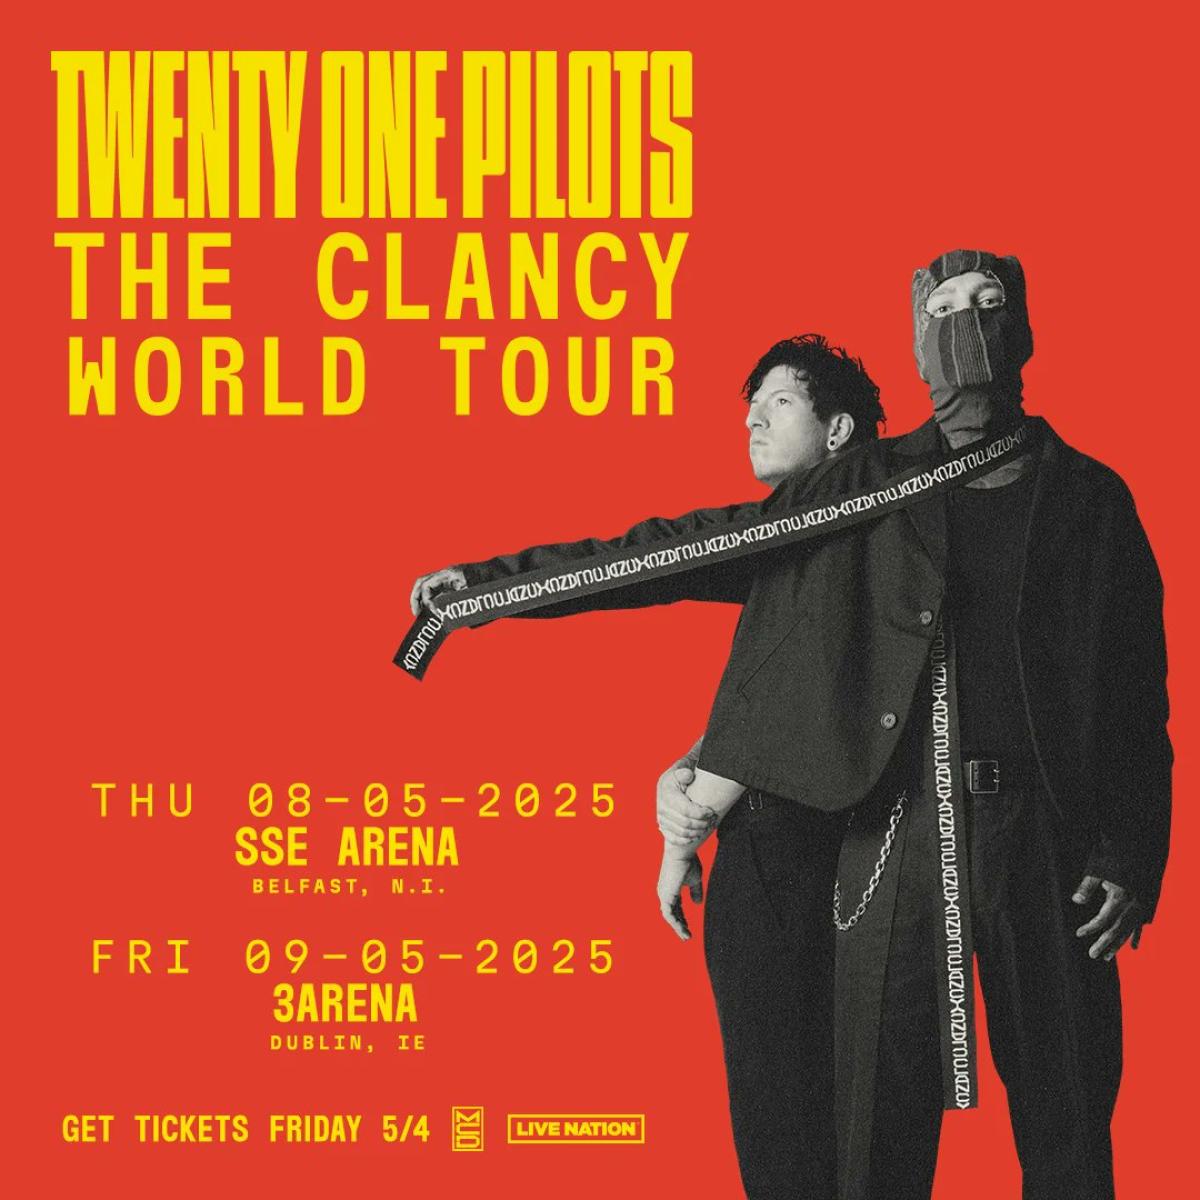 Twenty One Pilots - The Clancy World Tour at 3Arena Dublin Tickets